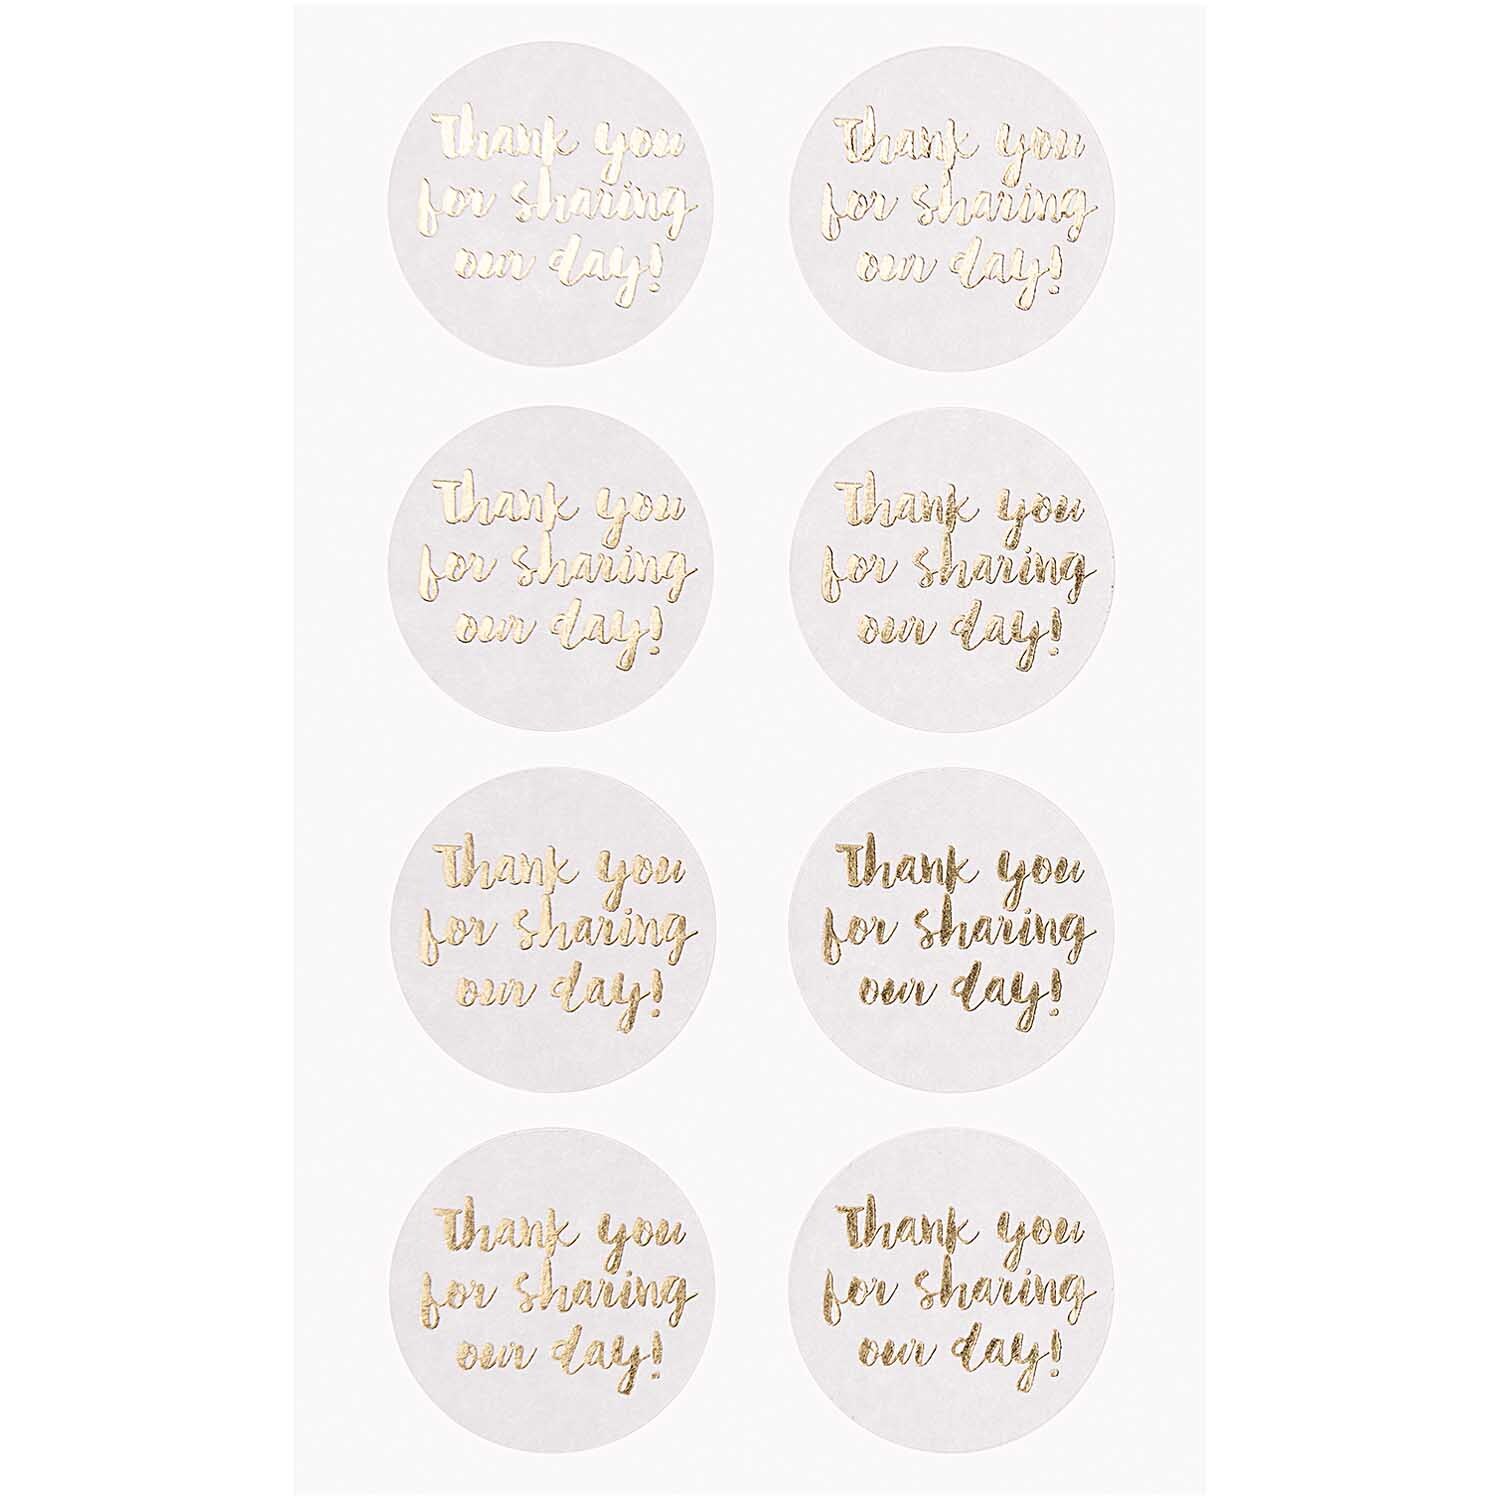 Paper Poetry Sticker Thank you for sharing our day weiß 4 Blatt